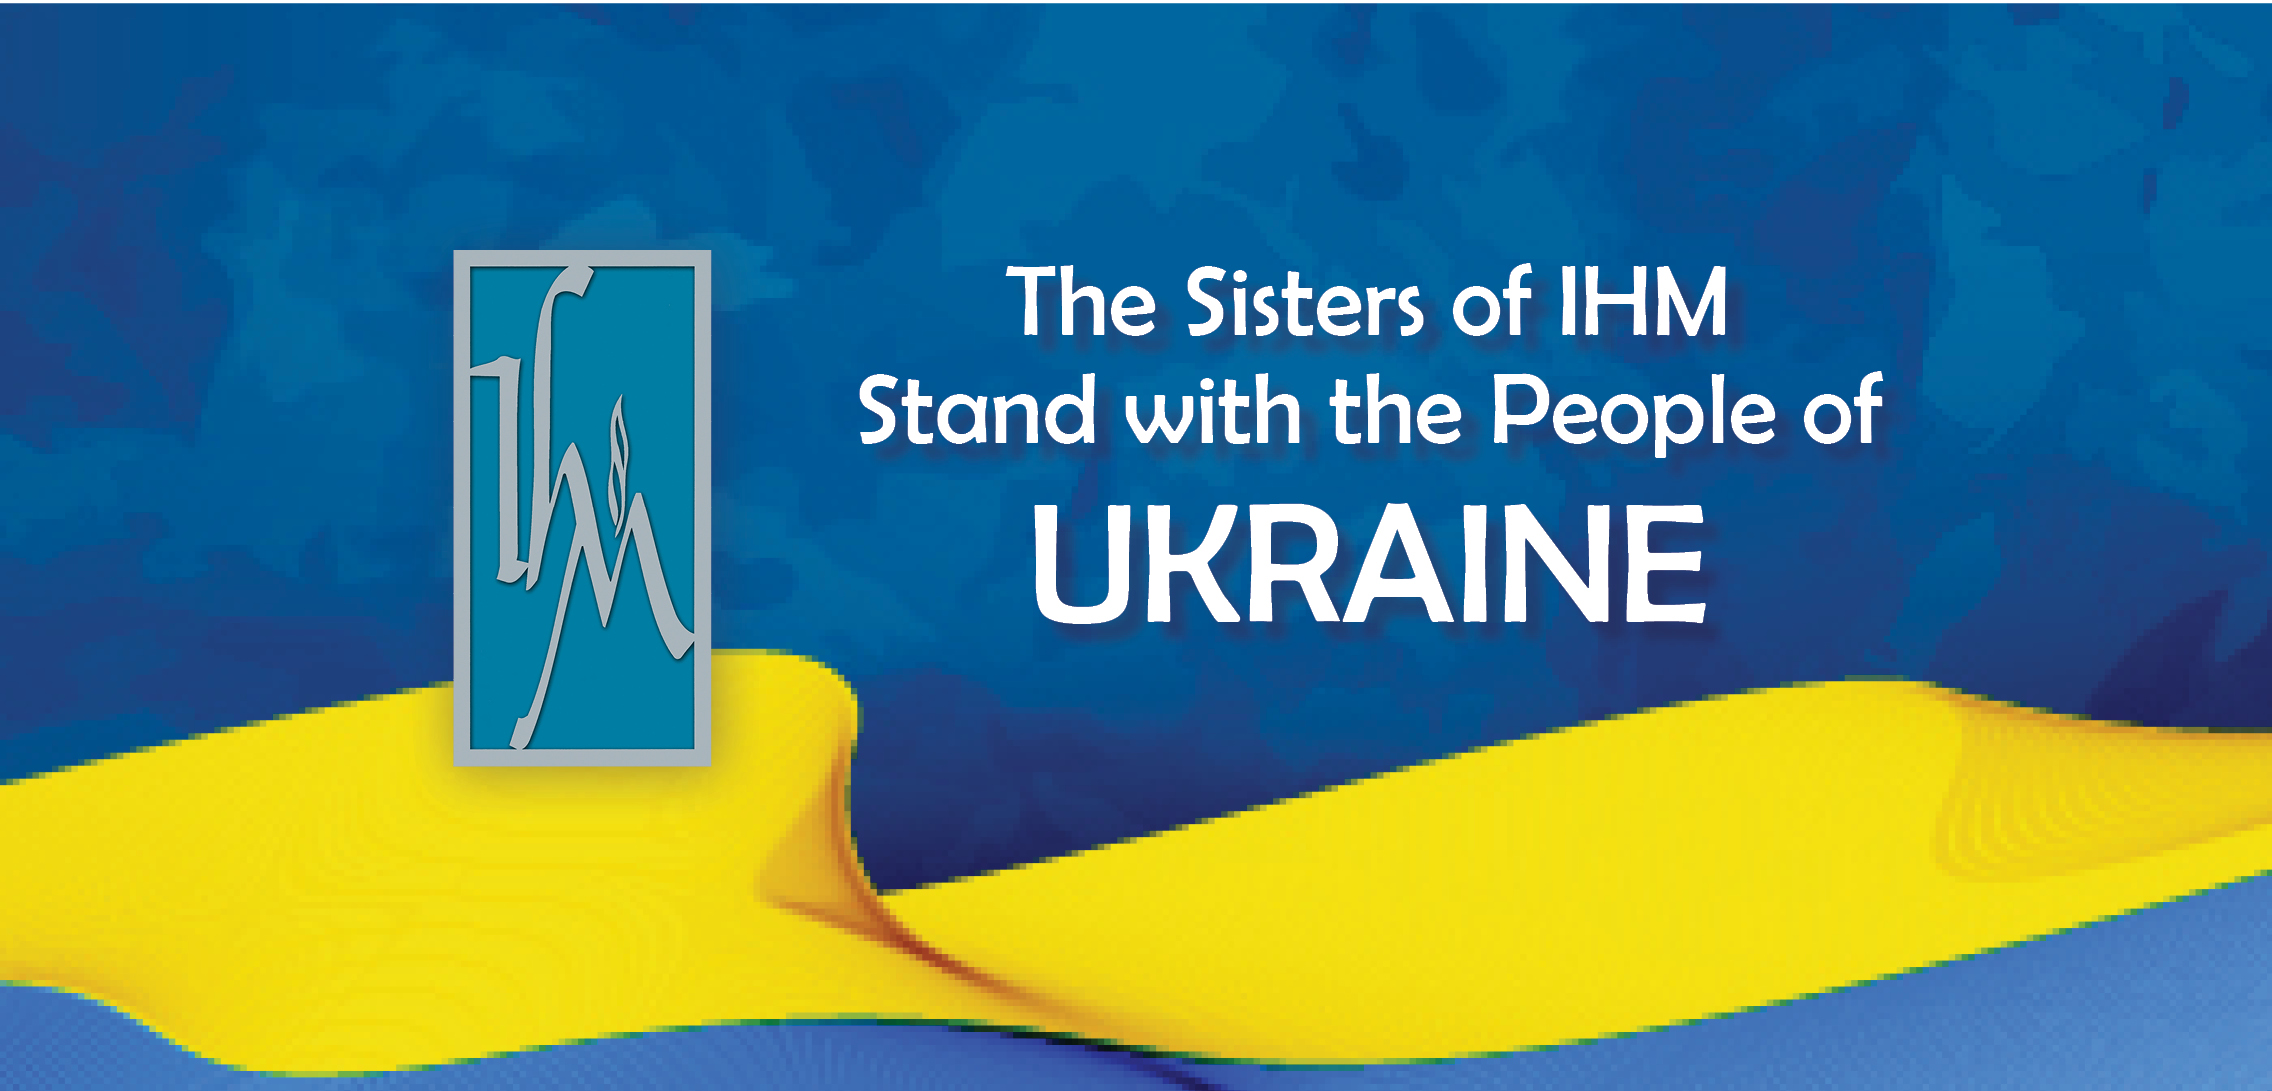 Sisters of IHM stand with the people of Ukraine